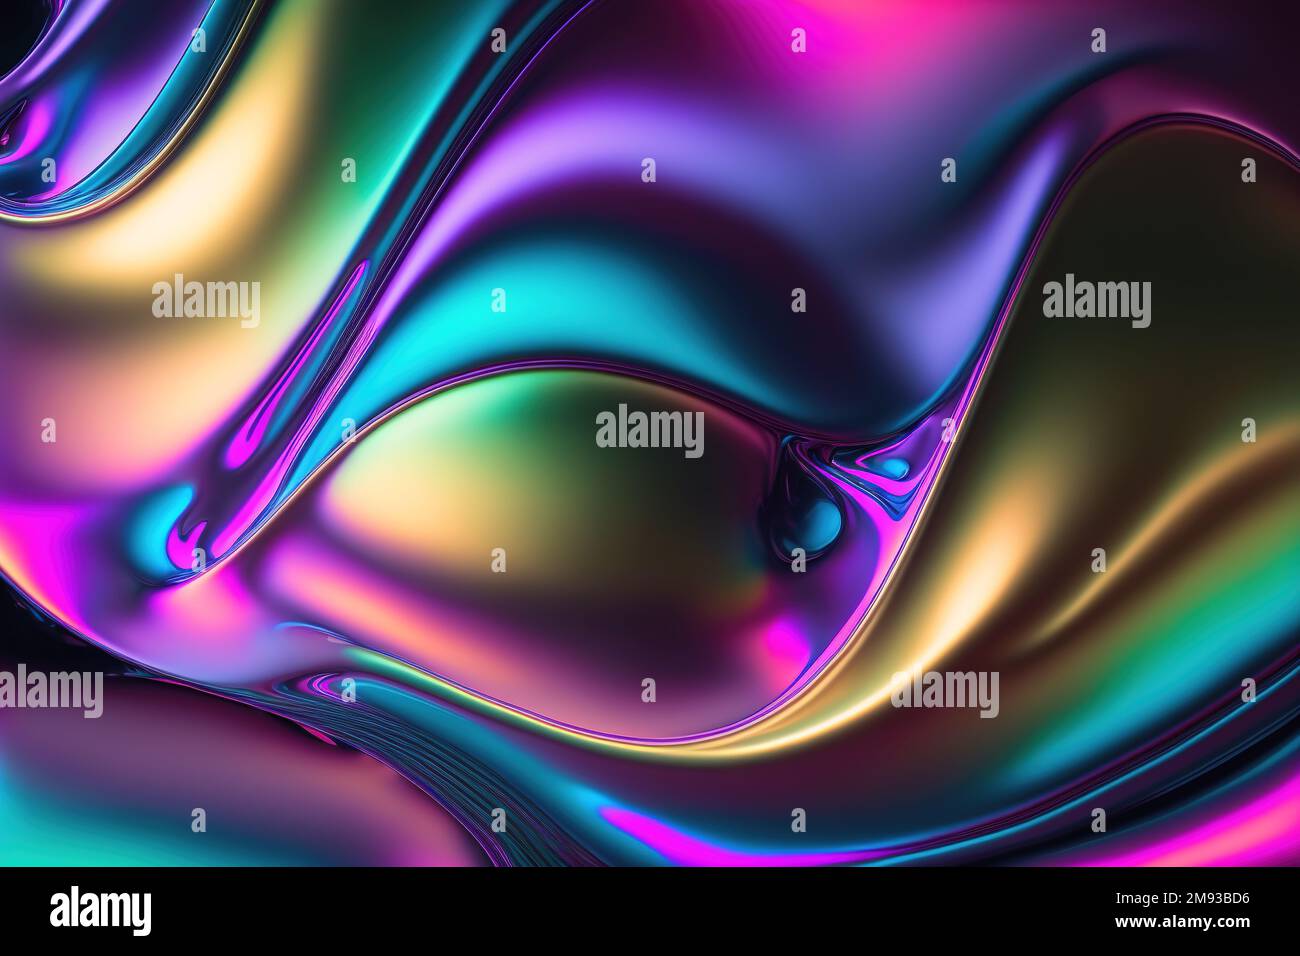 Iridescent colors ultraviolet metallic liquid. Abstract colorful background Stock Photo